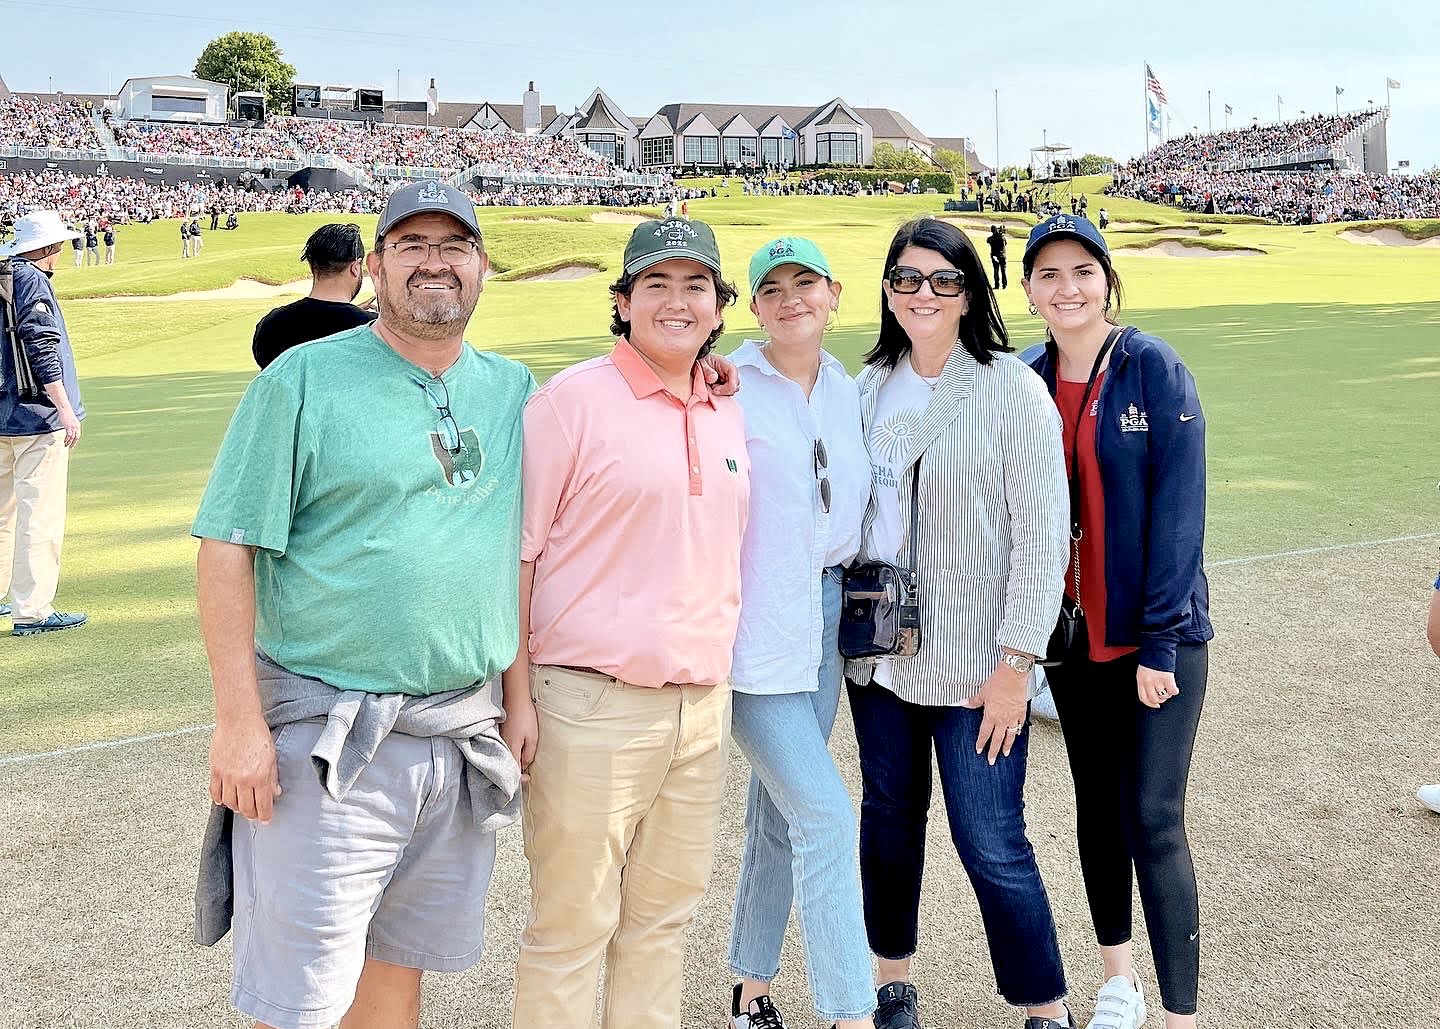 Davila (middle) and her family at the 2022 PGA Championship at Southern Hills in Oklahoma.